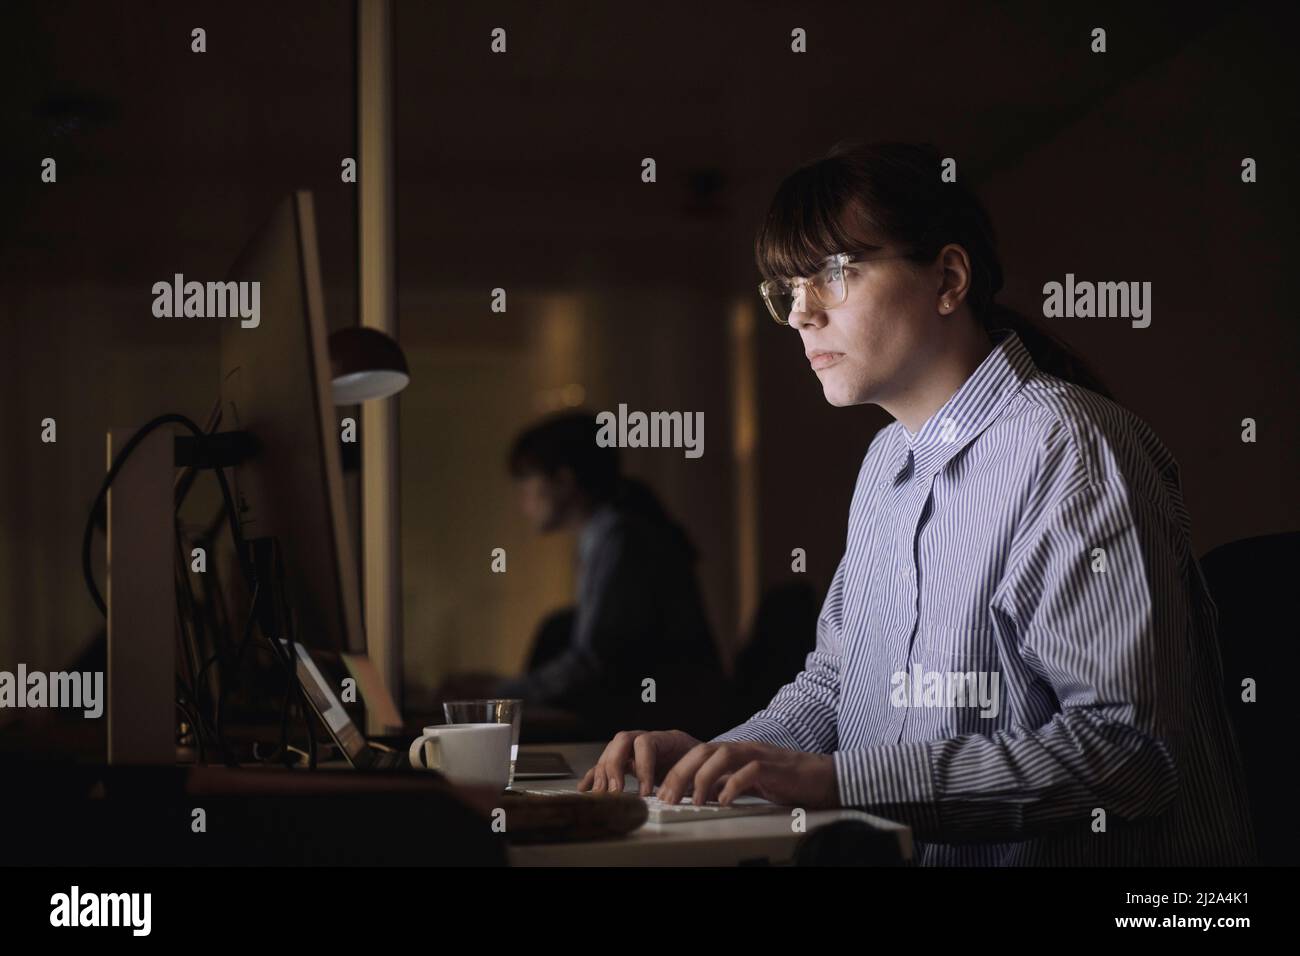 Young businesswoman using computer while working late in office at night Stock Photo